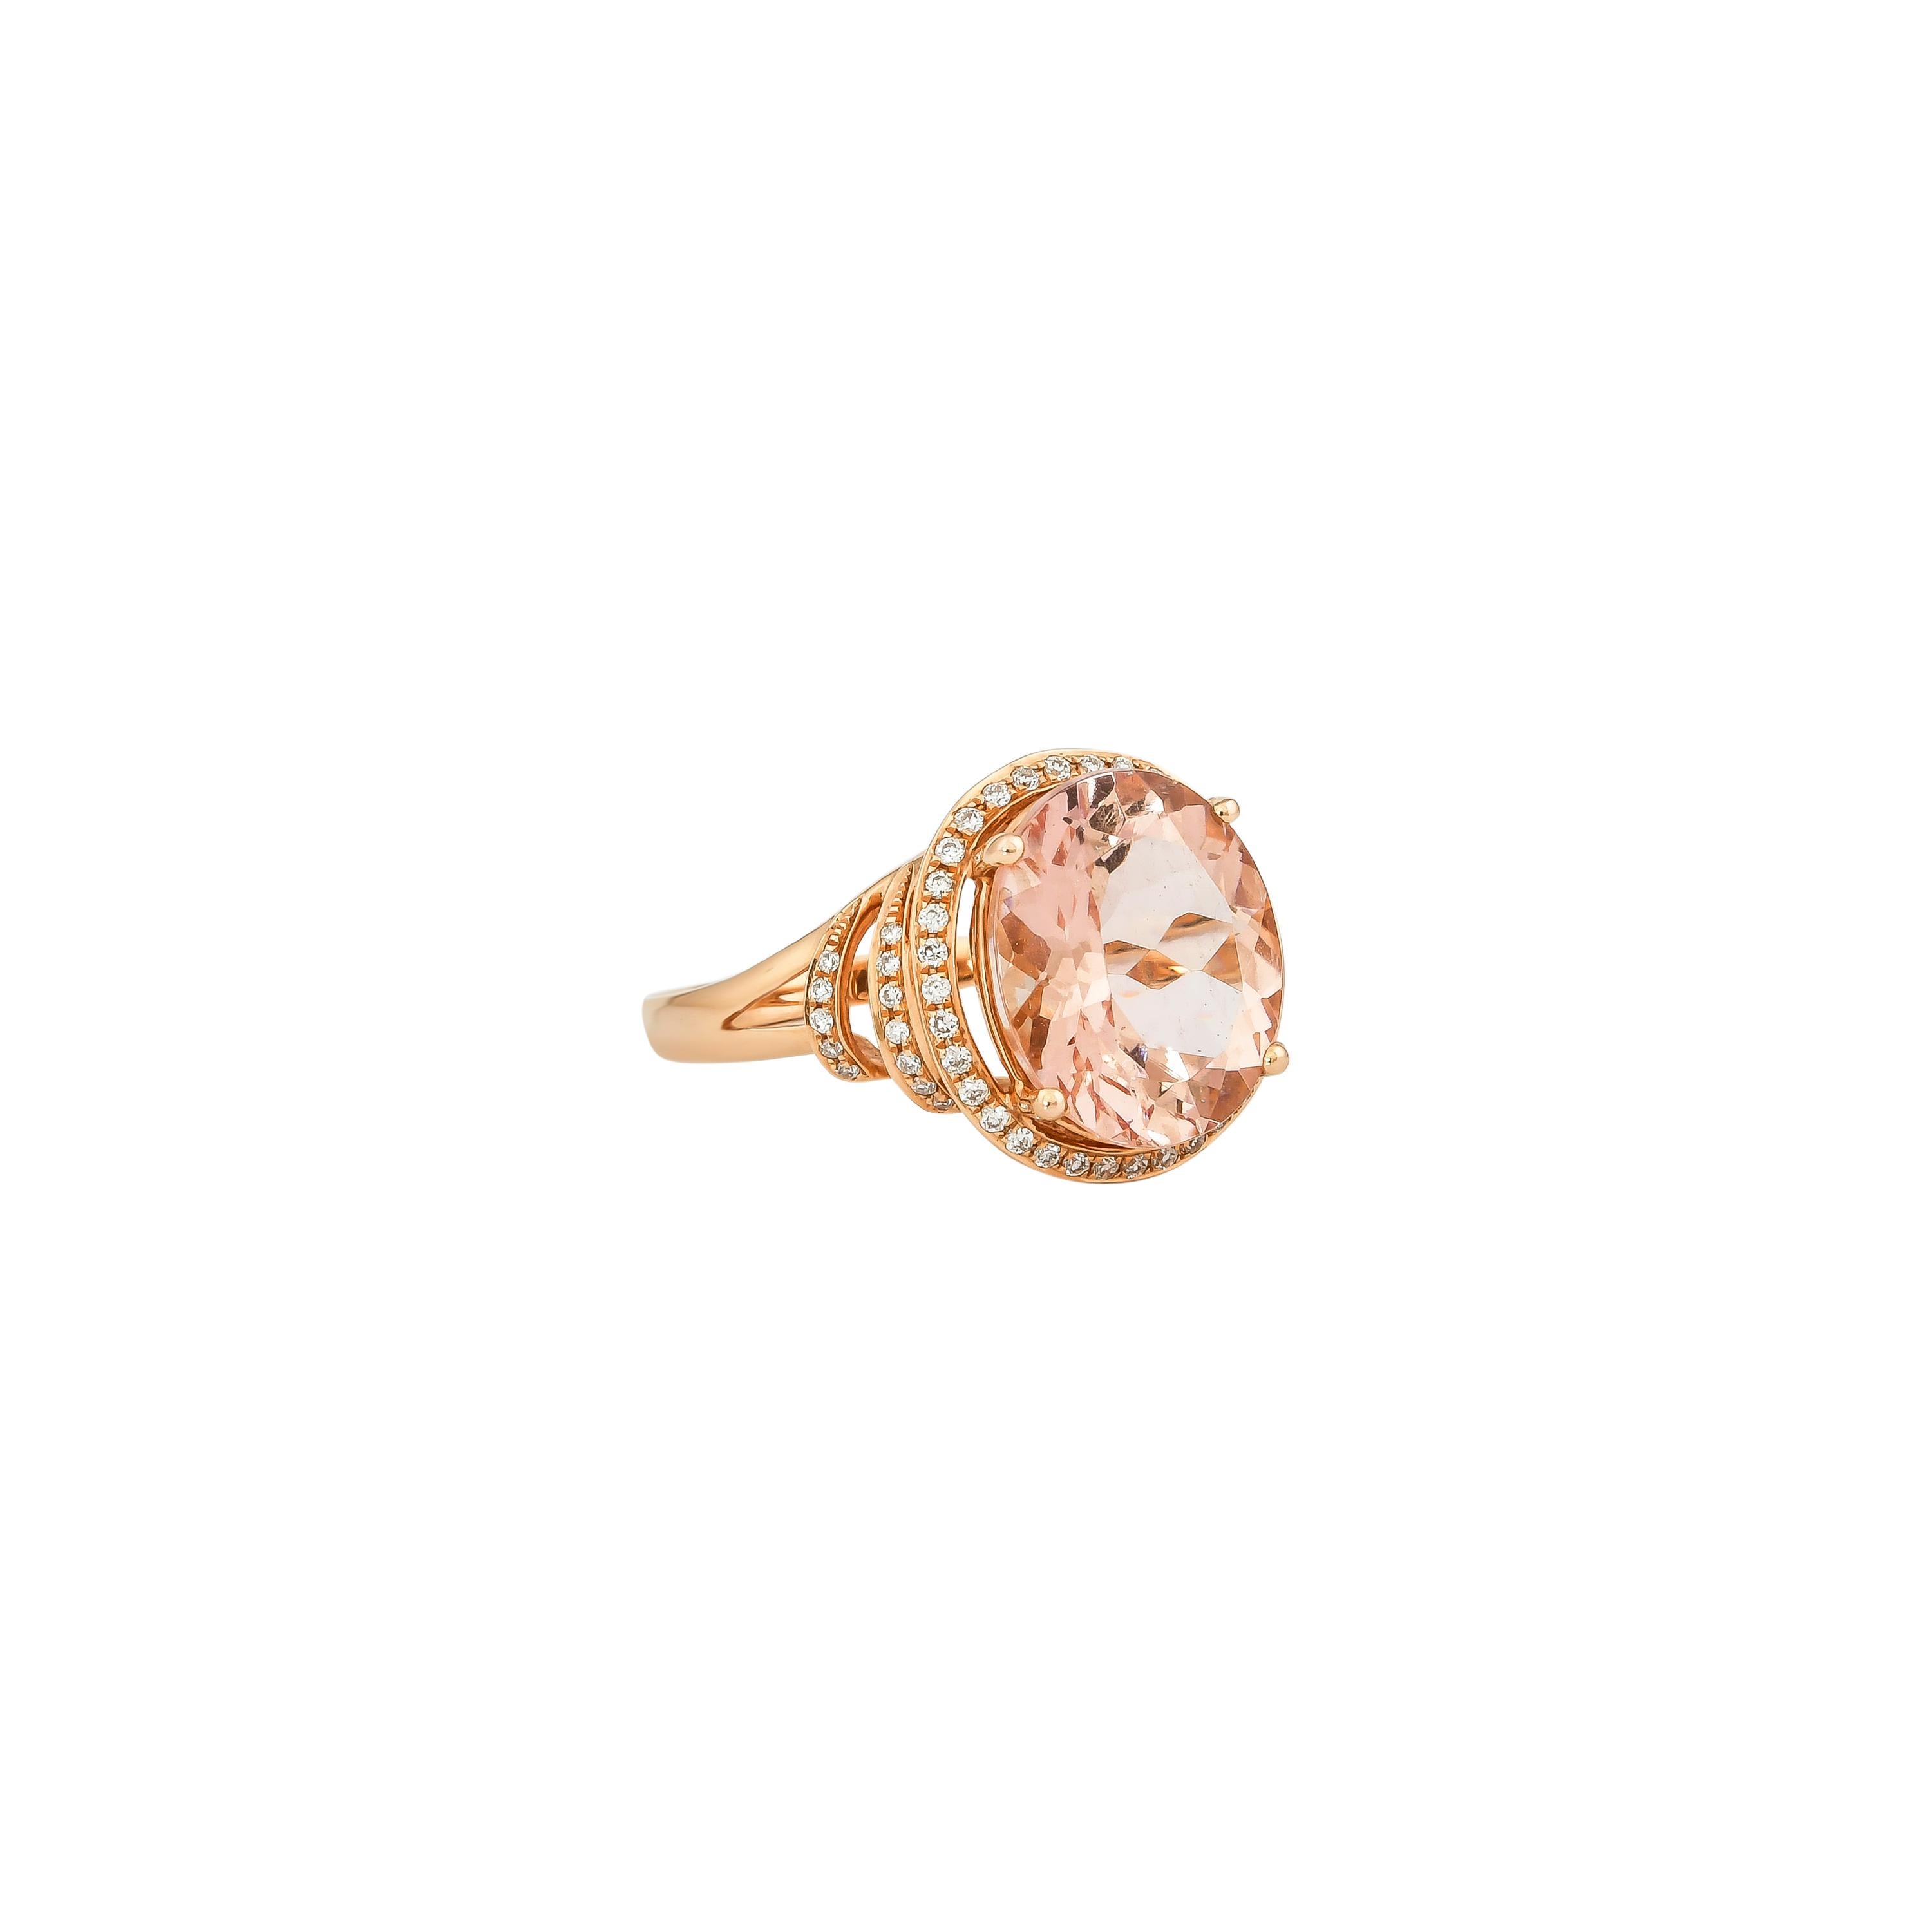 This collection features an array of magnificent morganites! Accented with diamonds these rings are made in rose gold and present a classic yet elegant look. 

Classic morganite ring in 18K rose gold with diamonds. 

Morganite: 4.26 carat oval